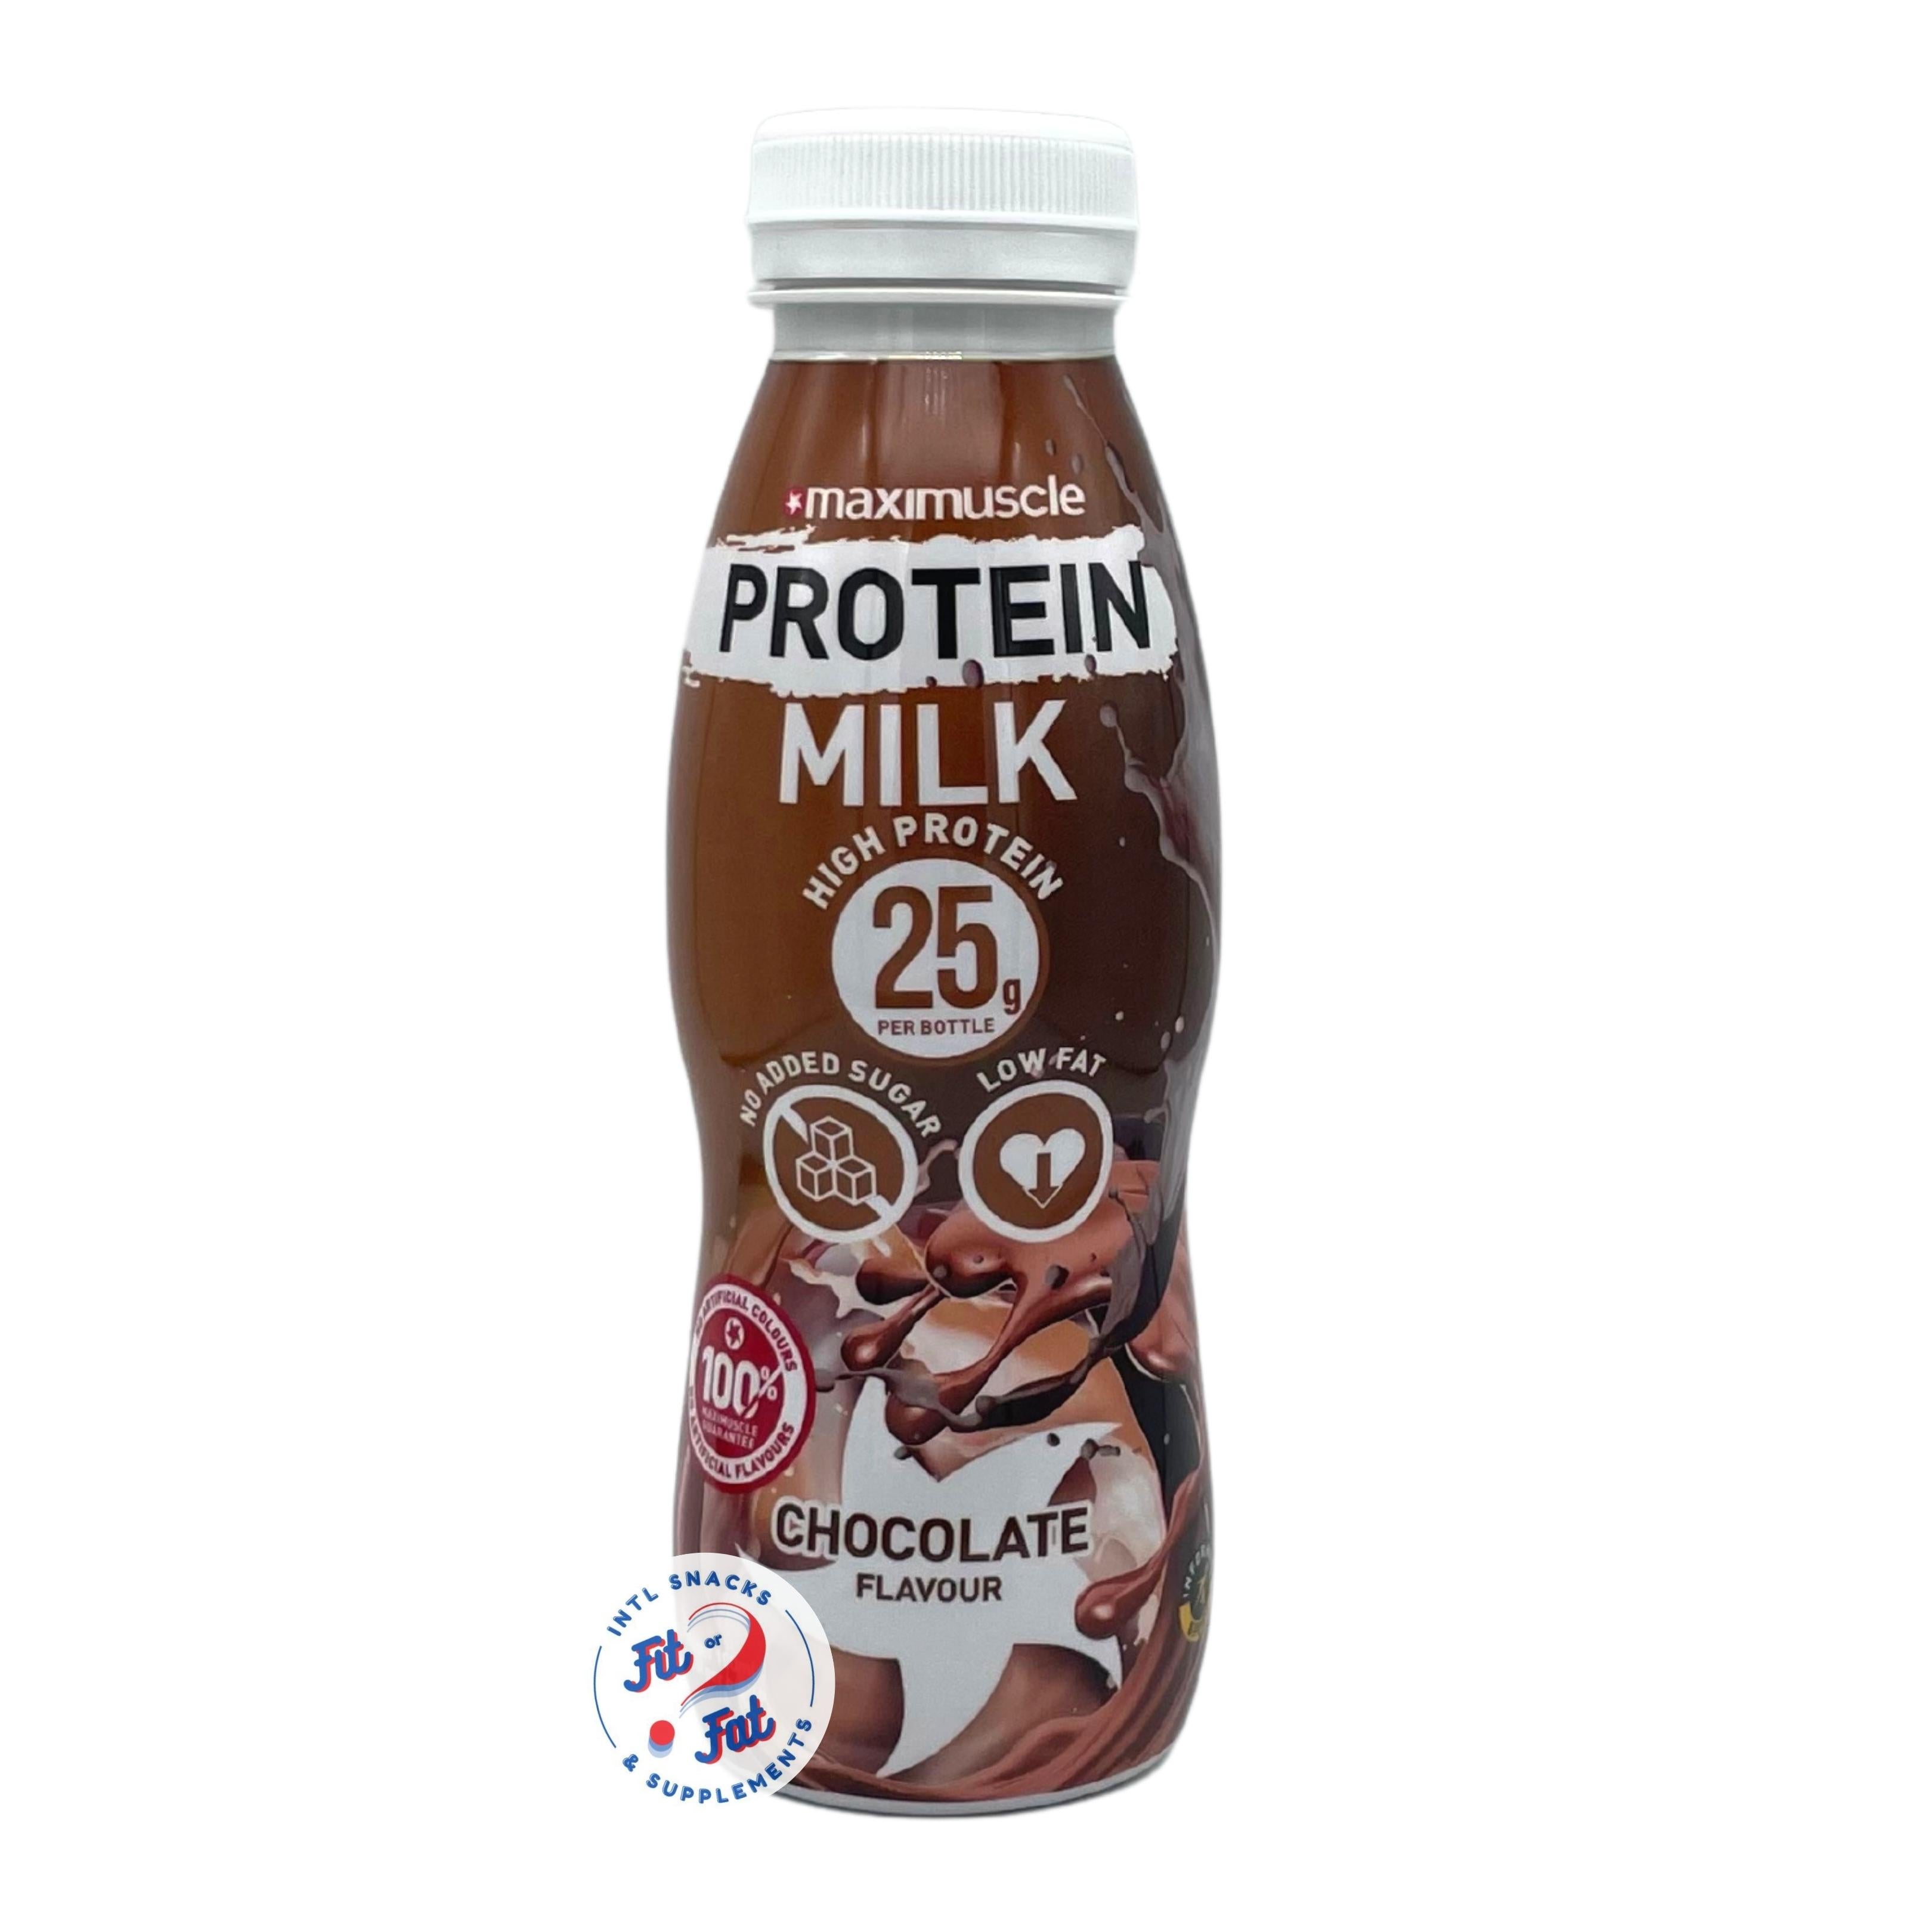 MAXI MUSCLE Protein Milk Chocolate